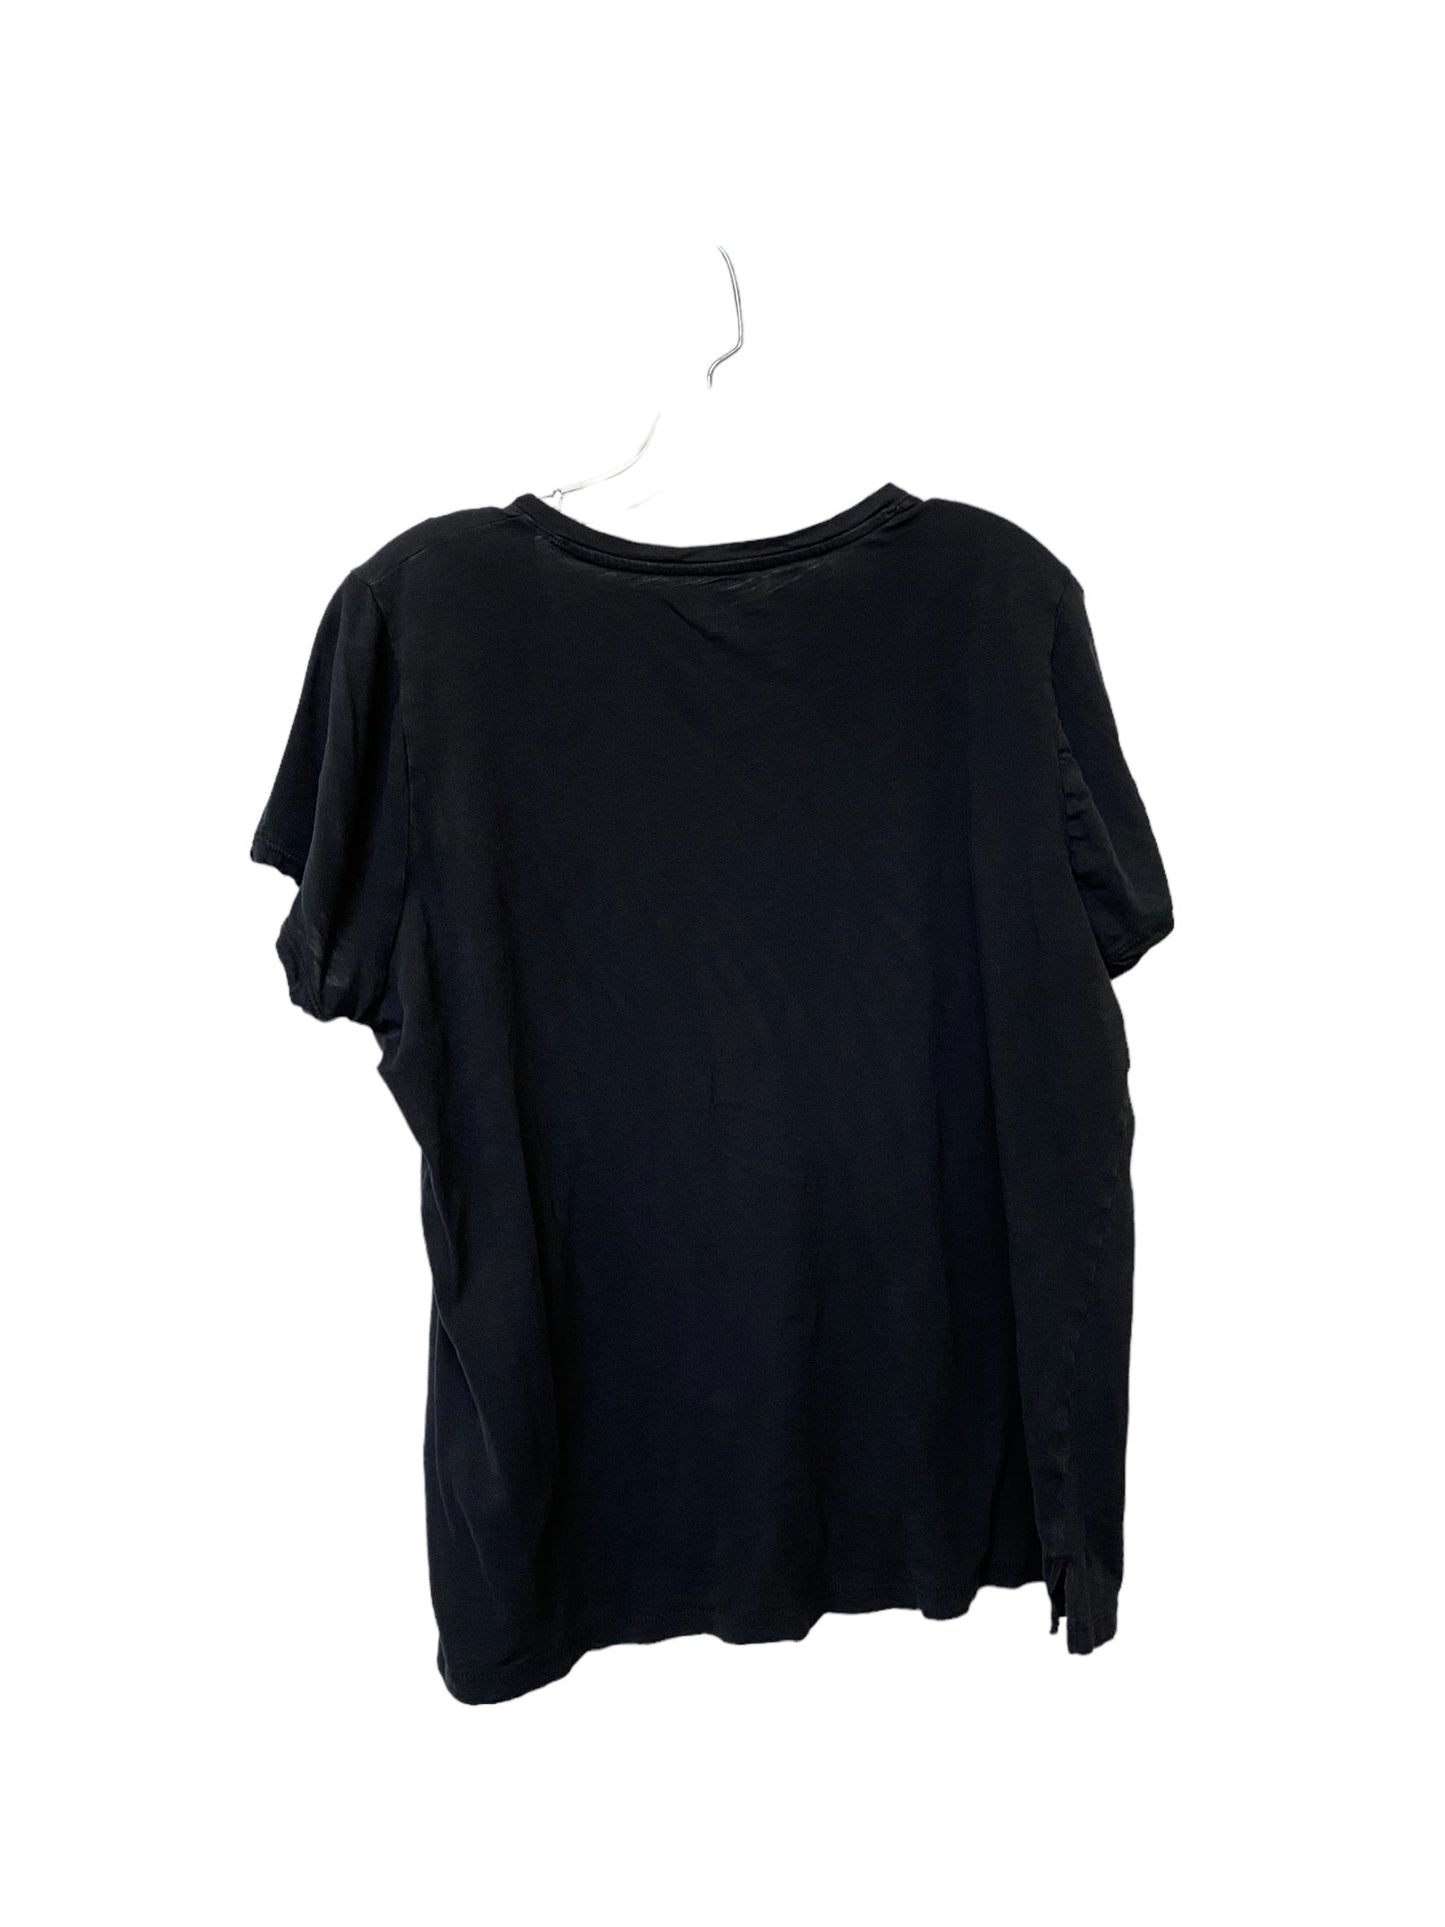 Black Top Short Sleeve Madewell, Size L